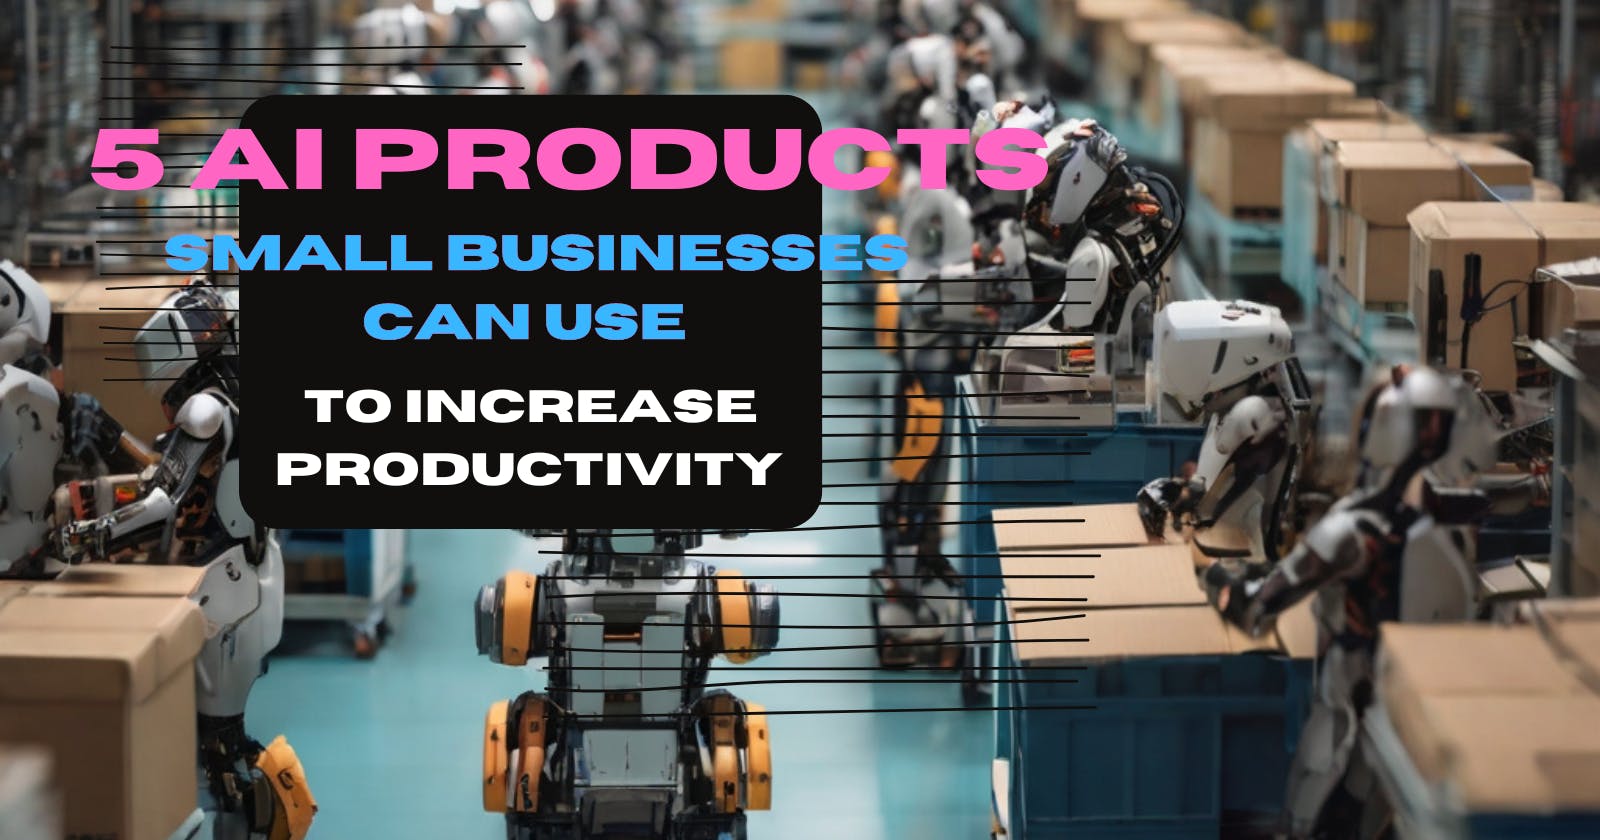 5 AI products small businesses use to increase productivity.